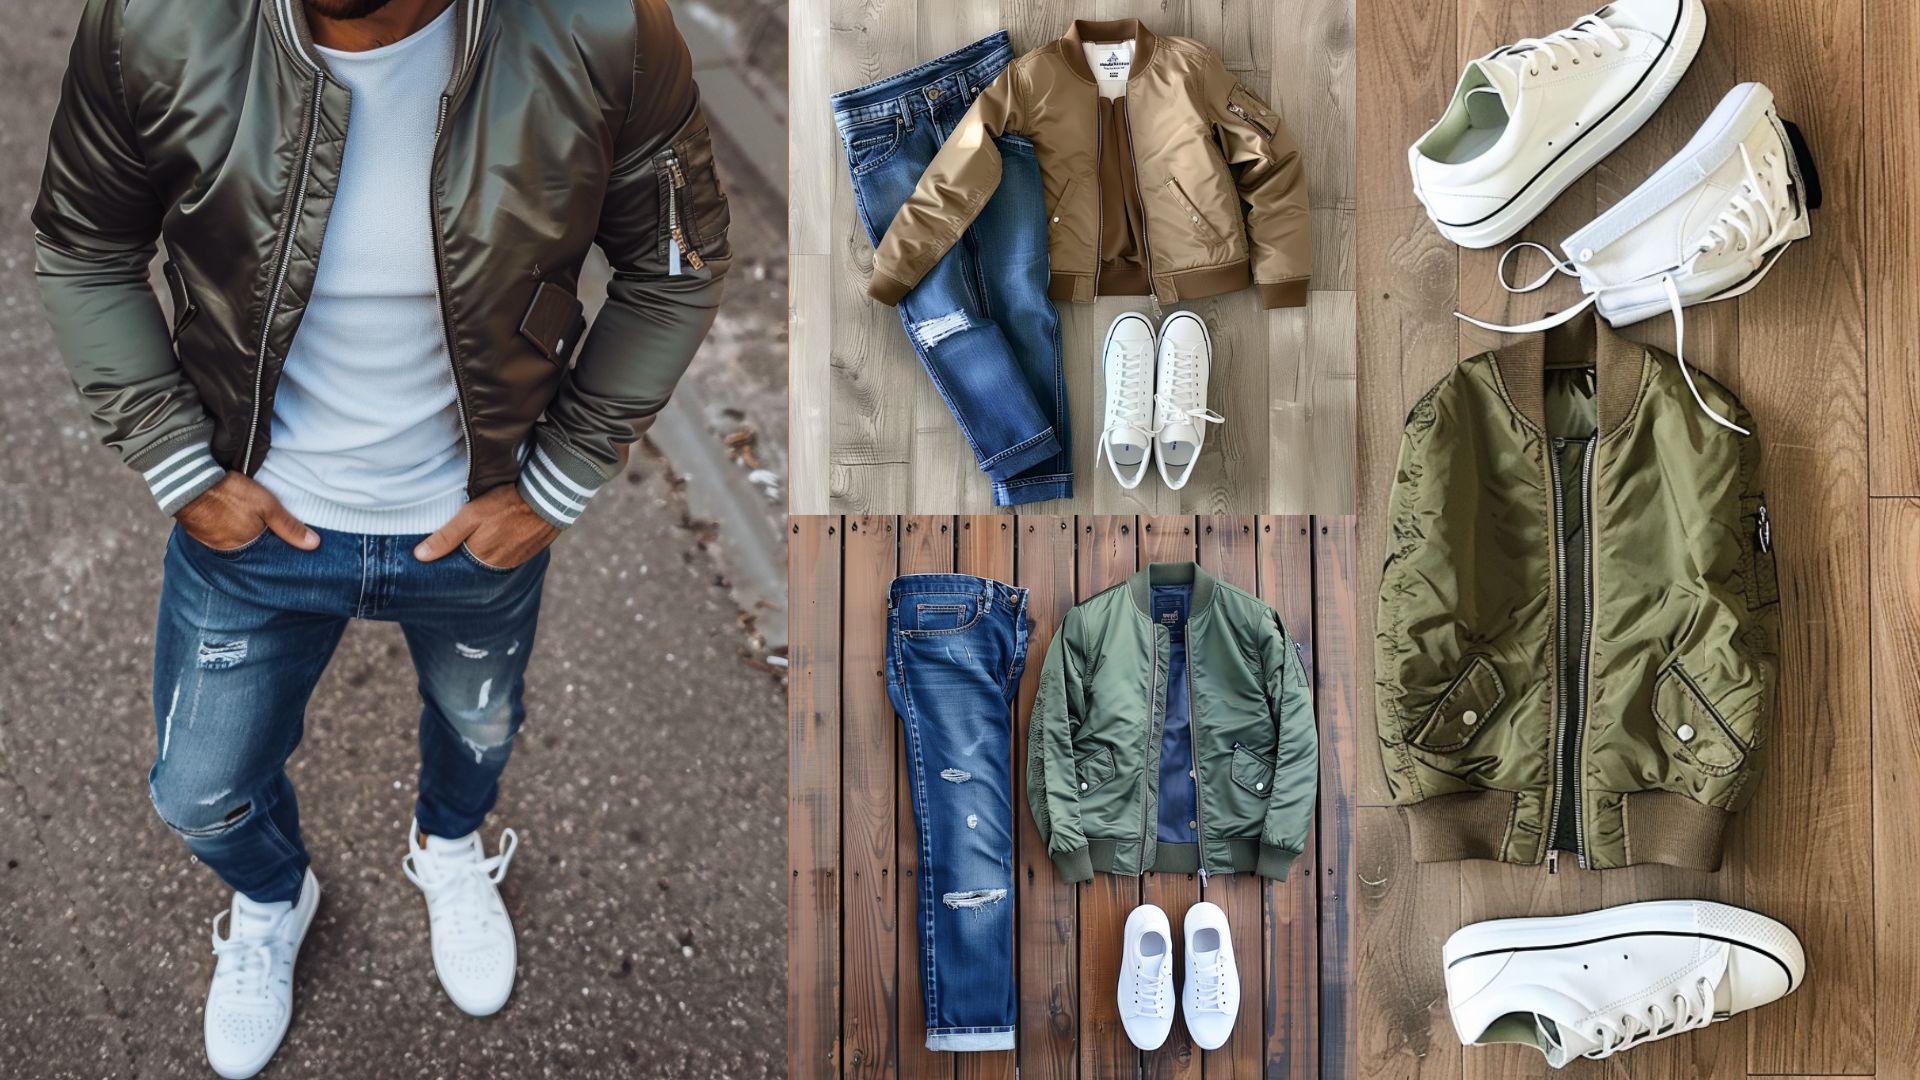 How Should a Bomber Jacket Fit